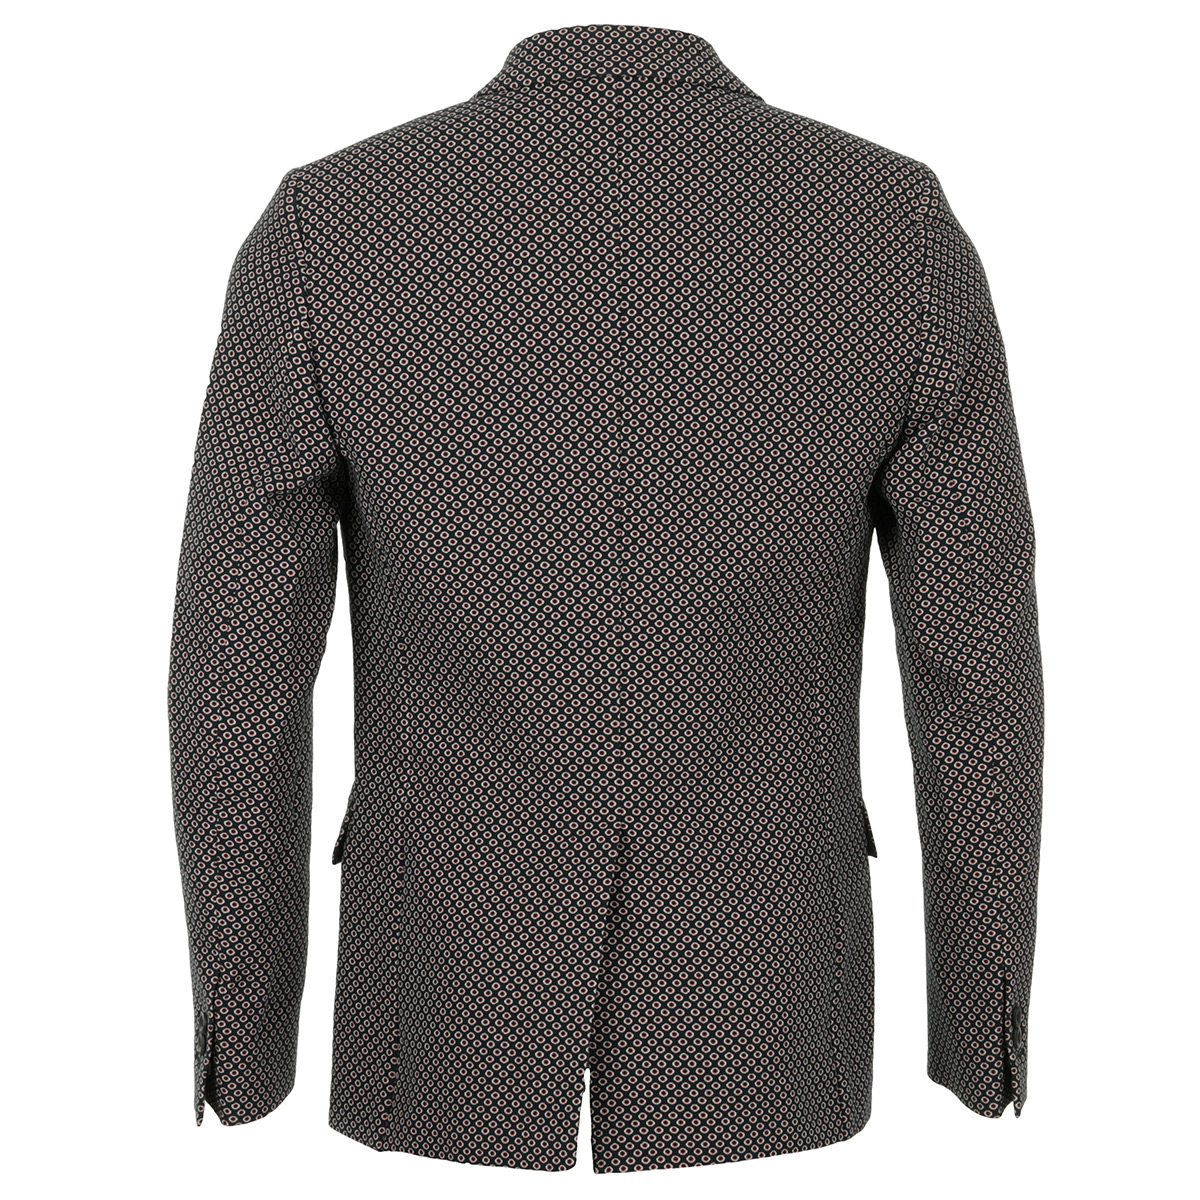 Éditions M.R Tailored Jacket